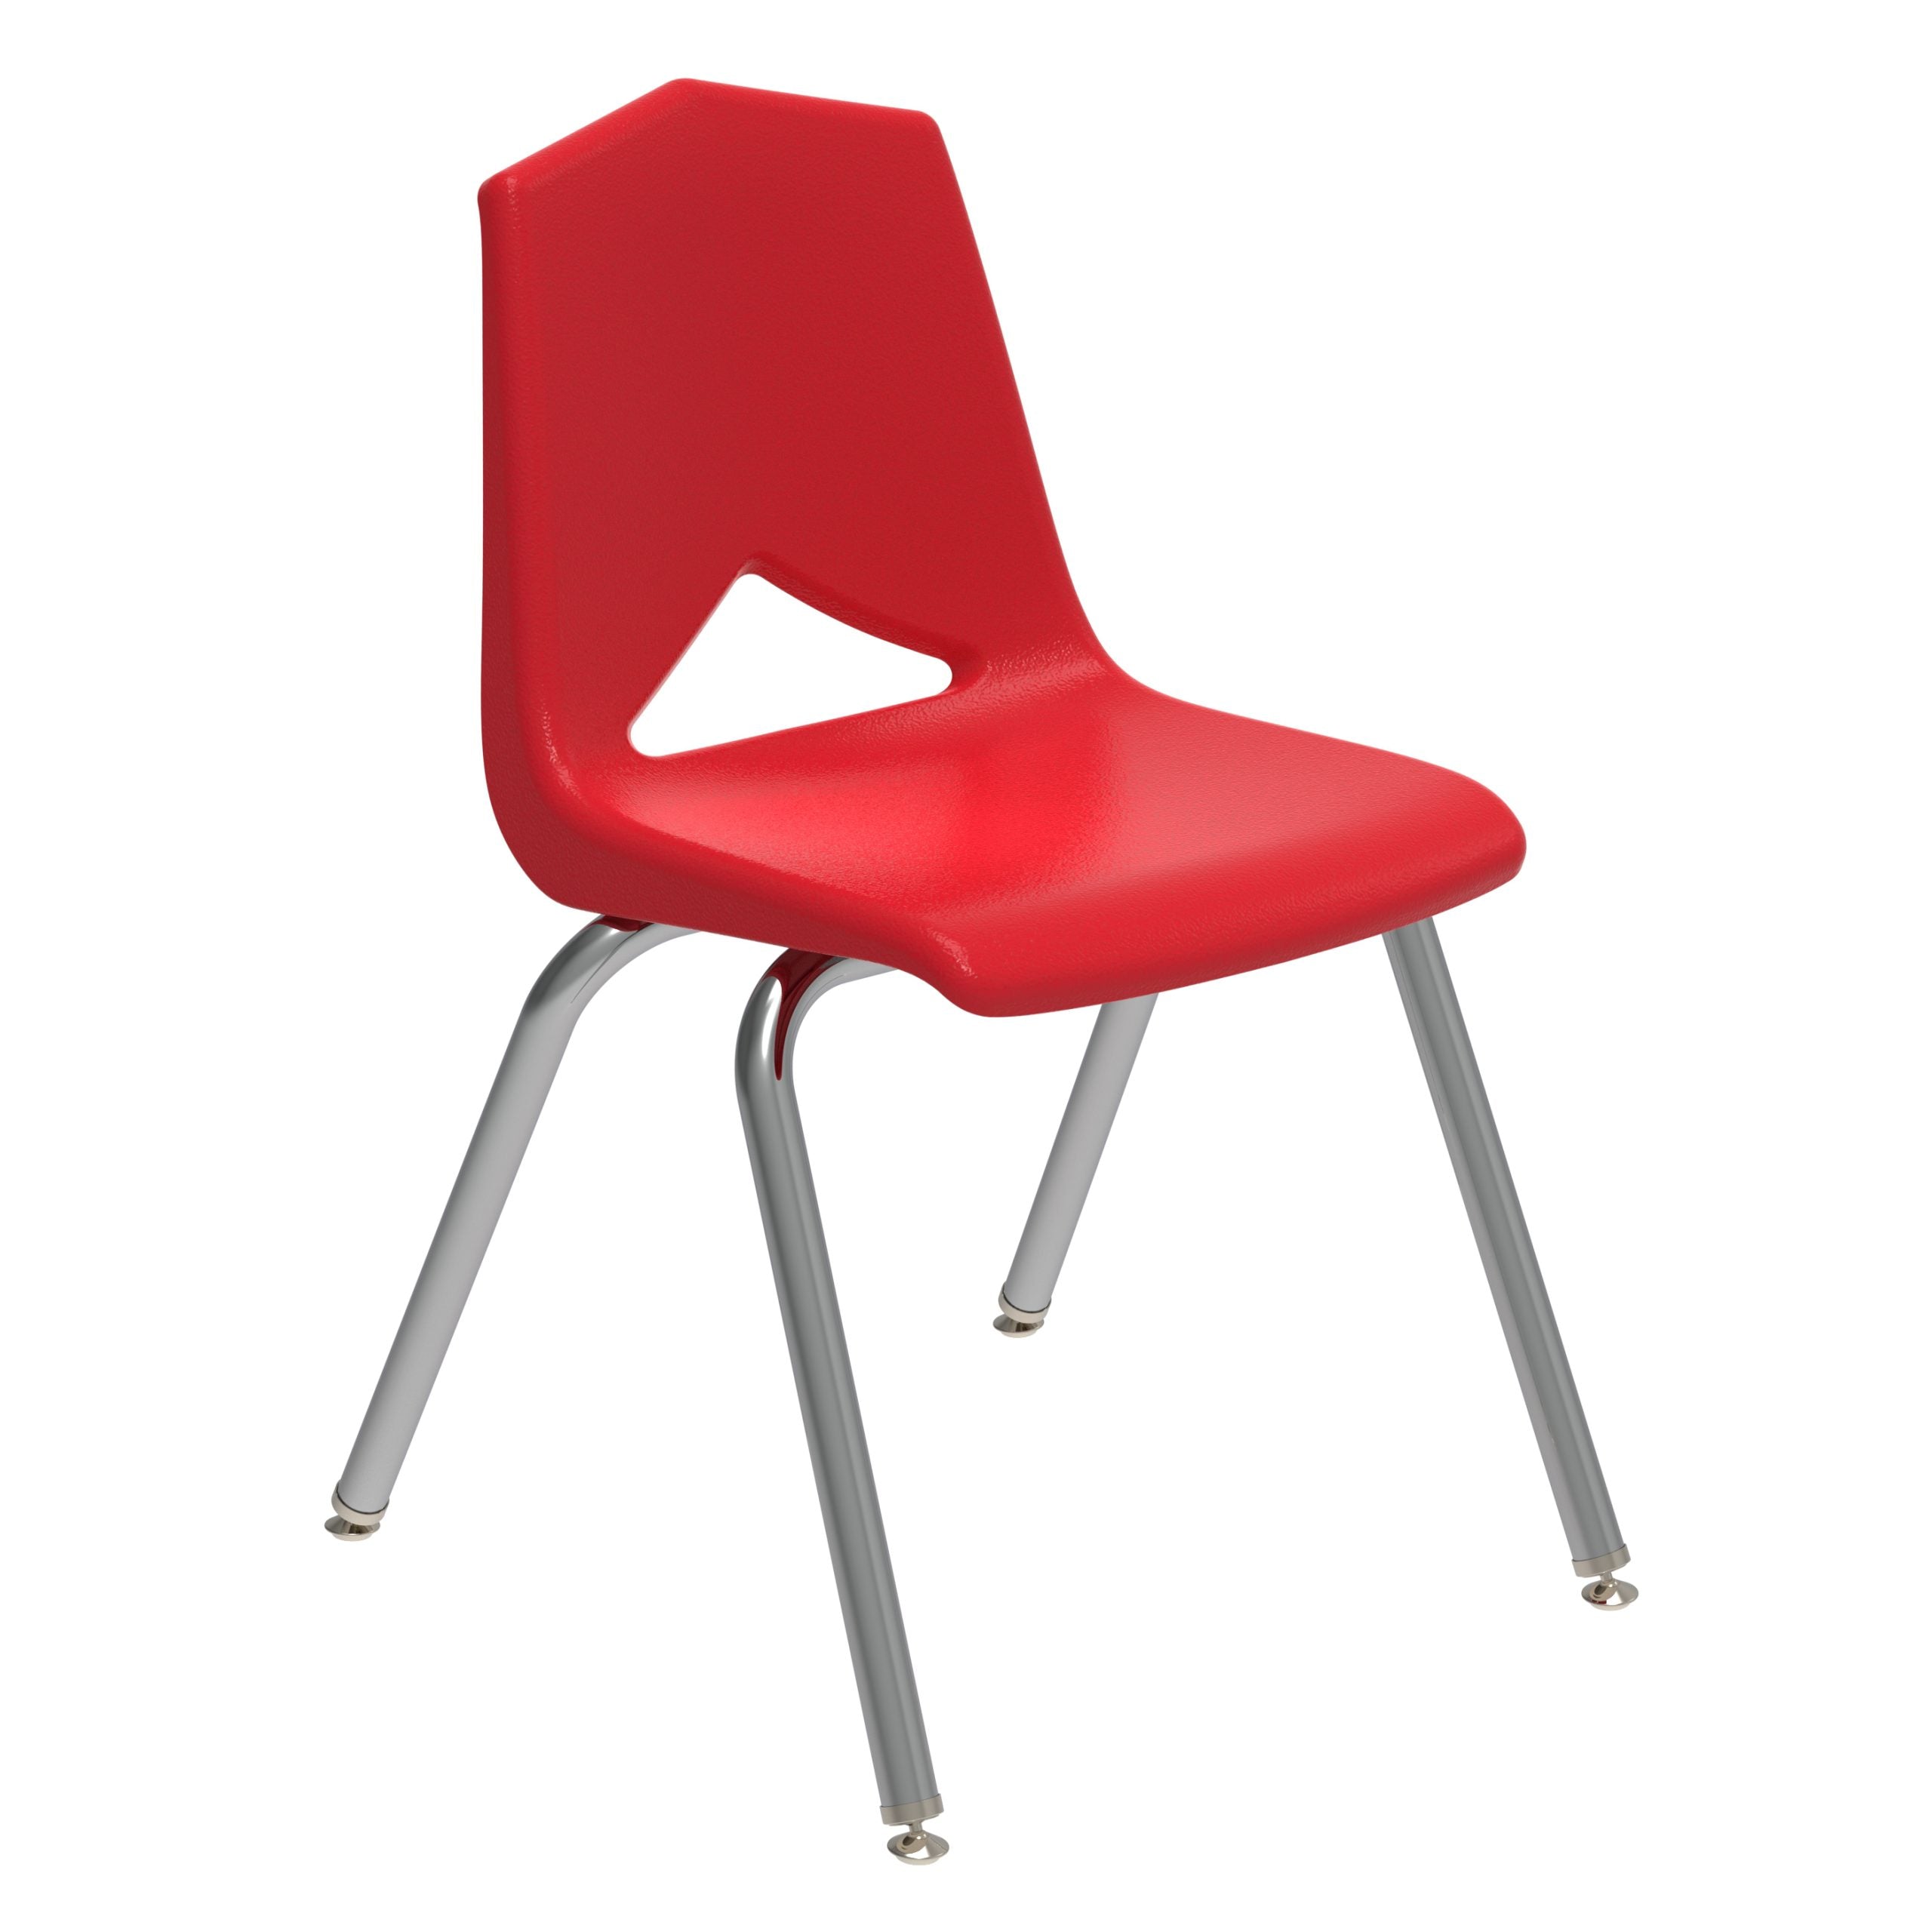 MG1101-14CR-Red 14” Series V-Back Stacking Chair-Red/Chrome Legs